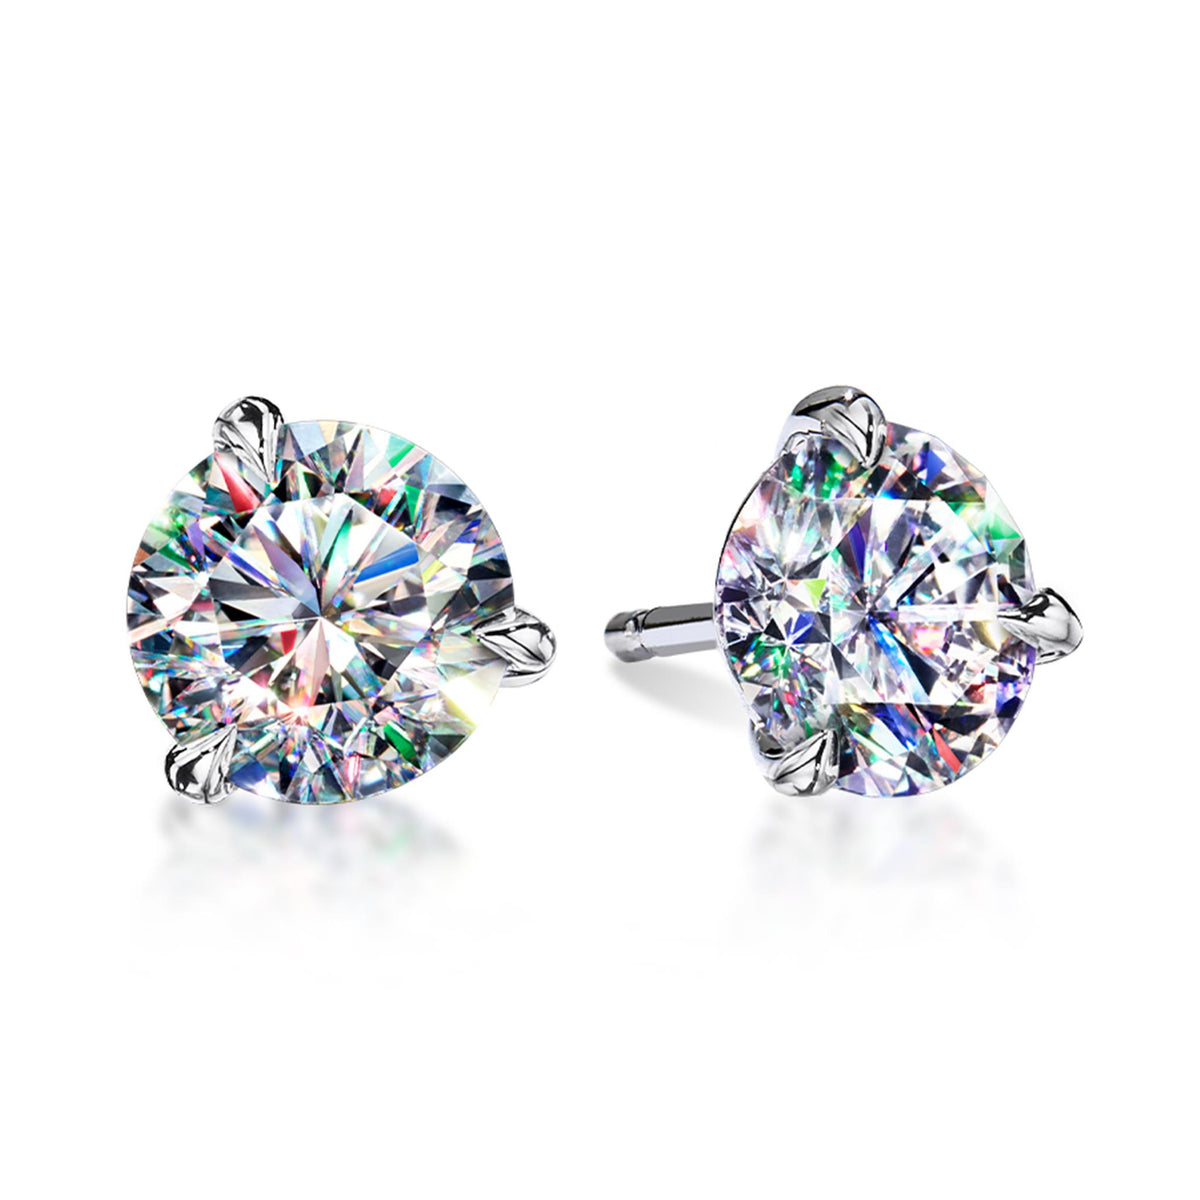 Facets Of Fire 14Kt White Gold Martini Stud Earrings With .84cttw Natural Diamonds